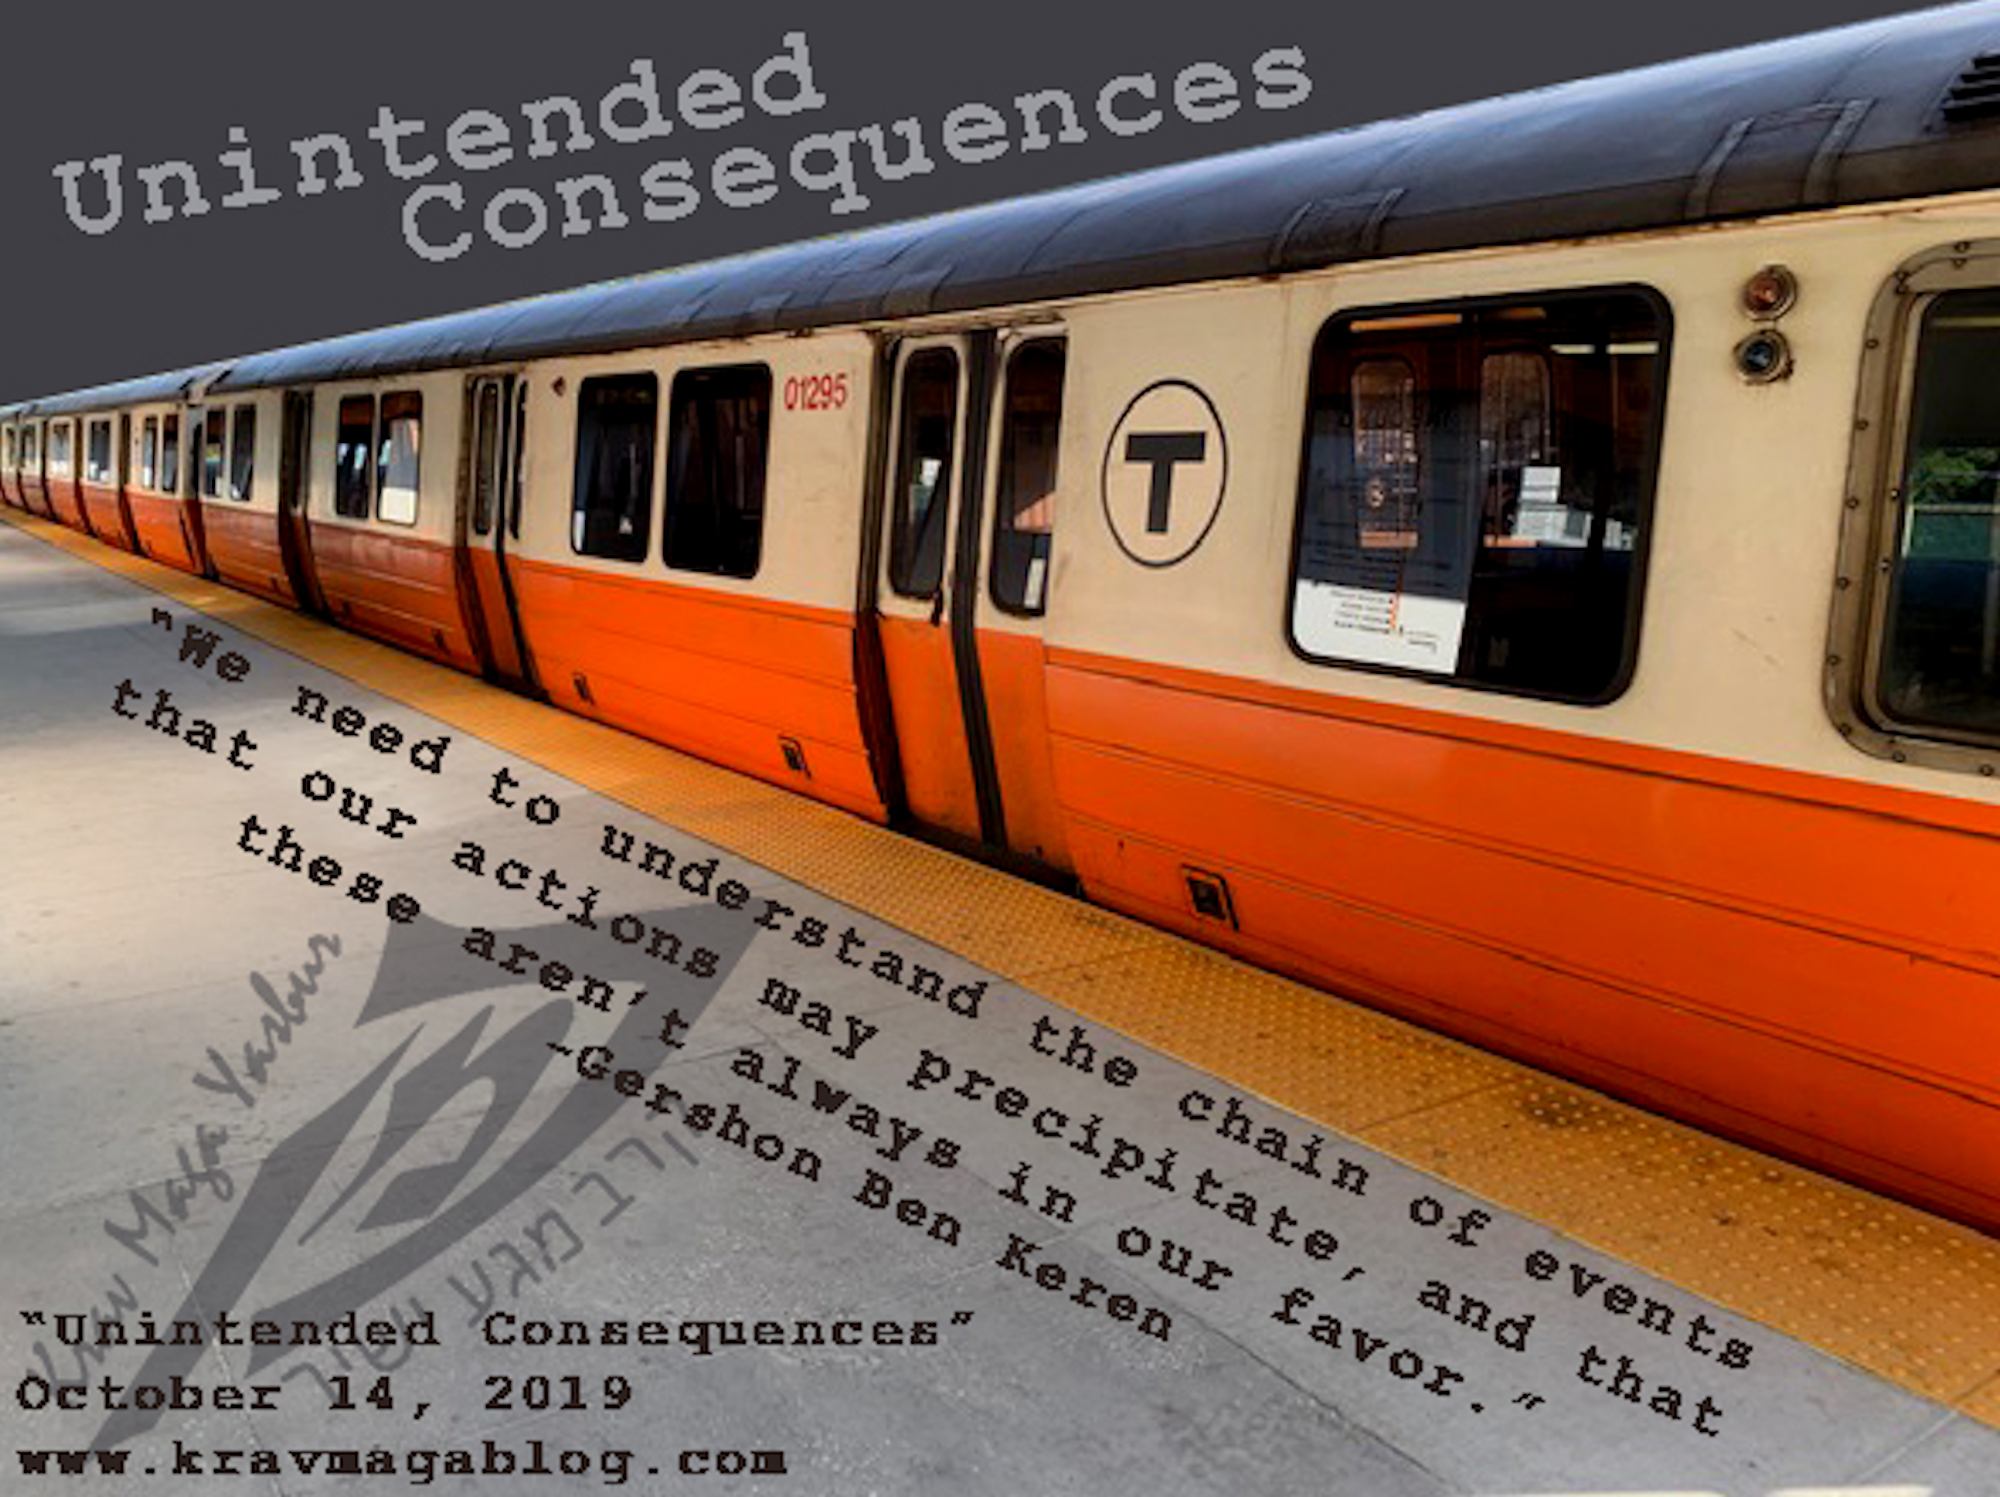 Blog About Unintended Consequences